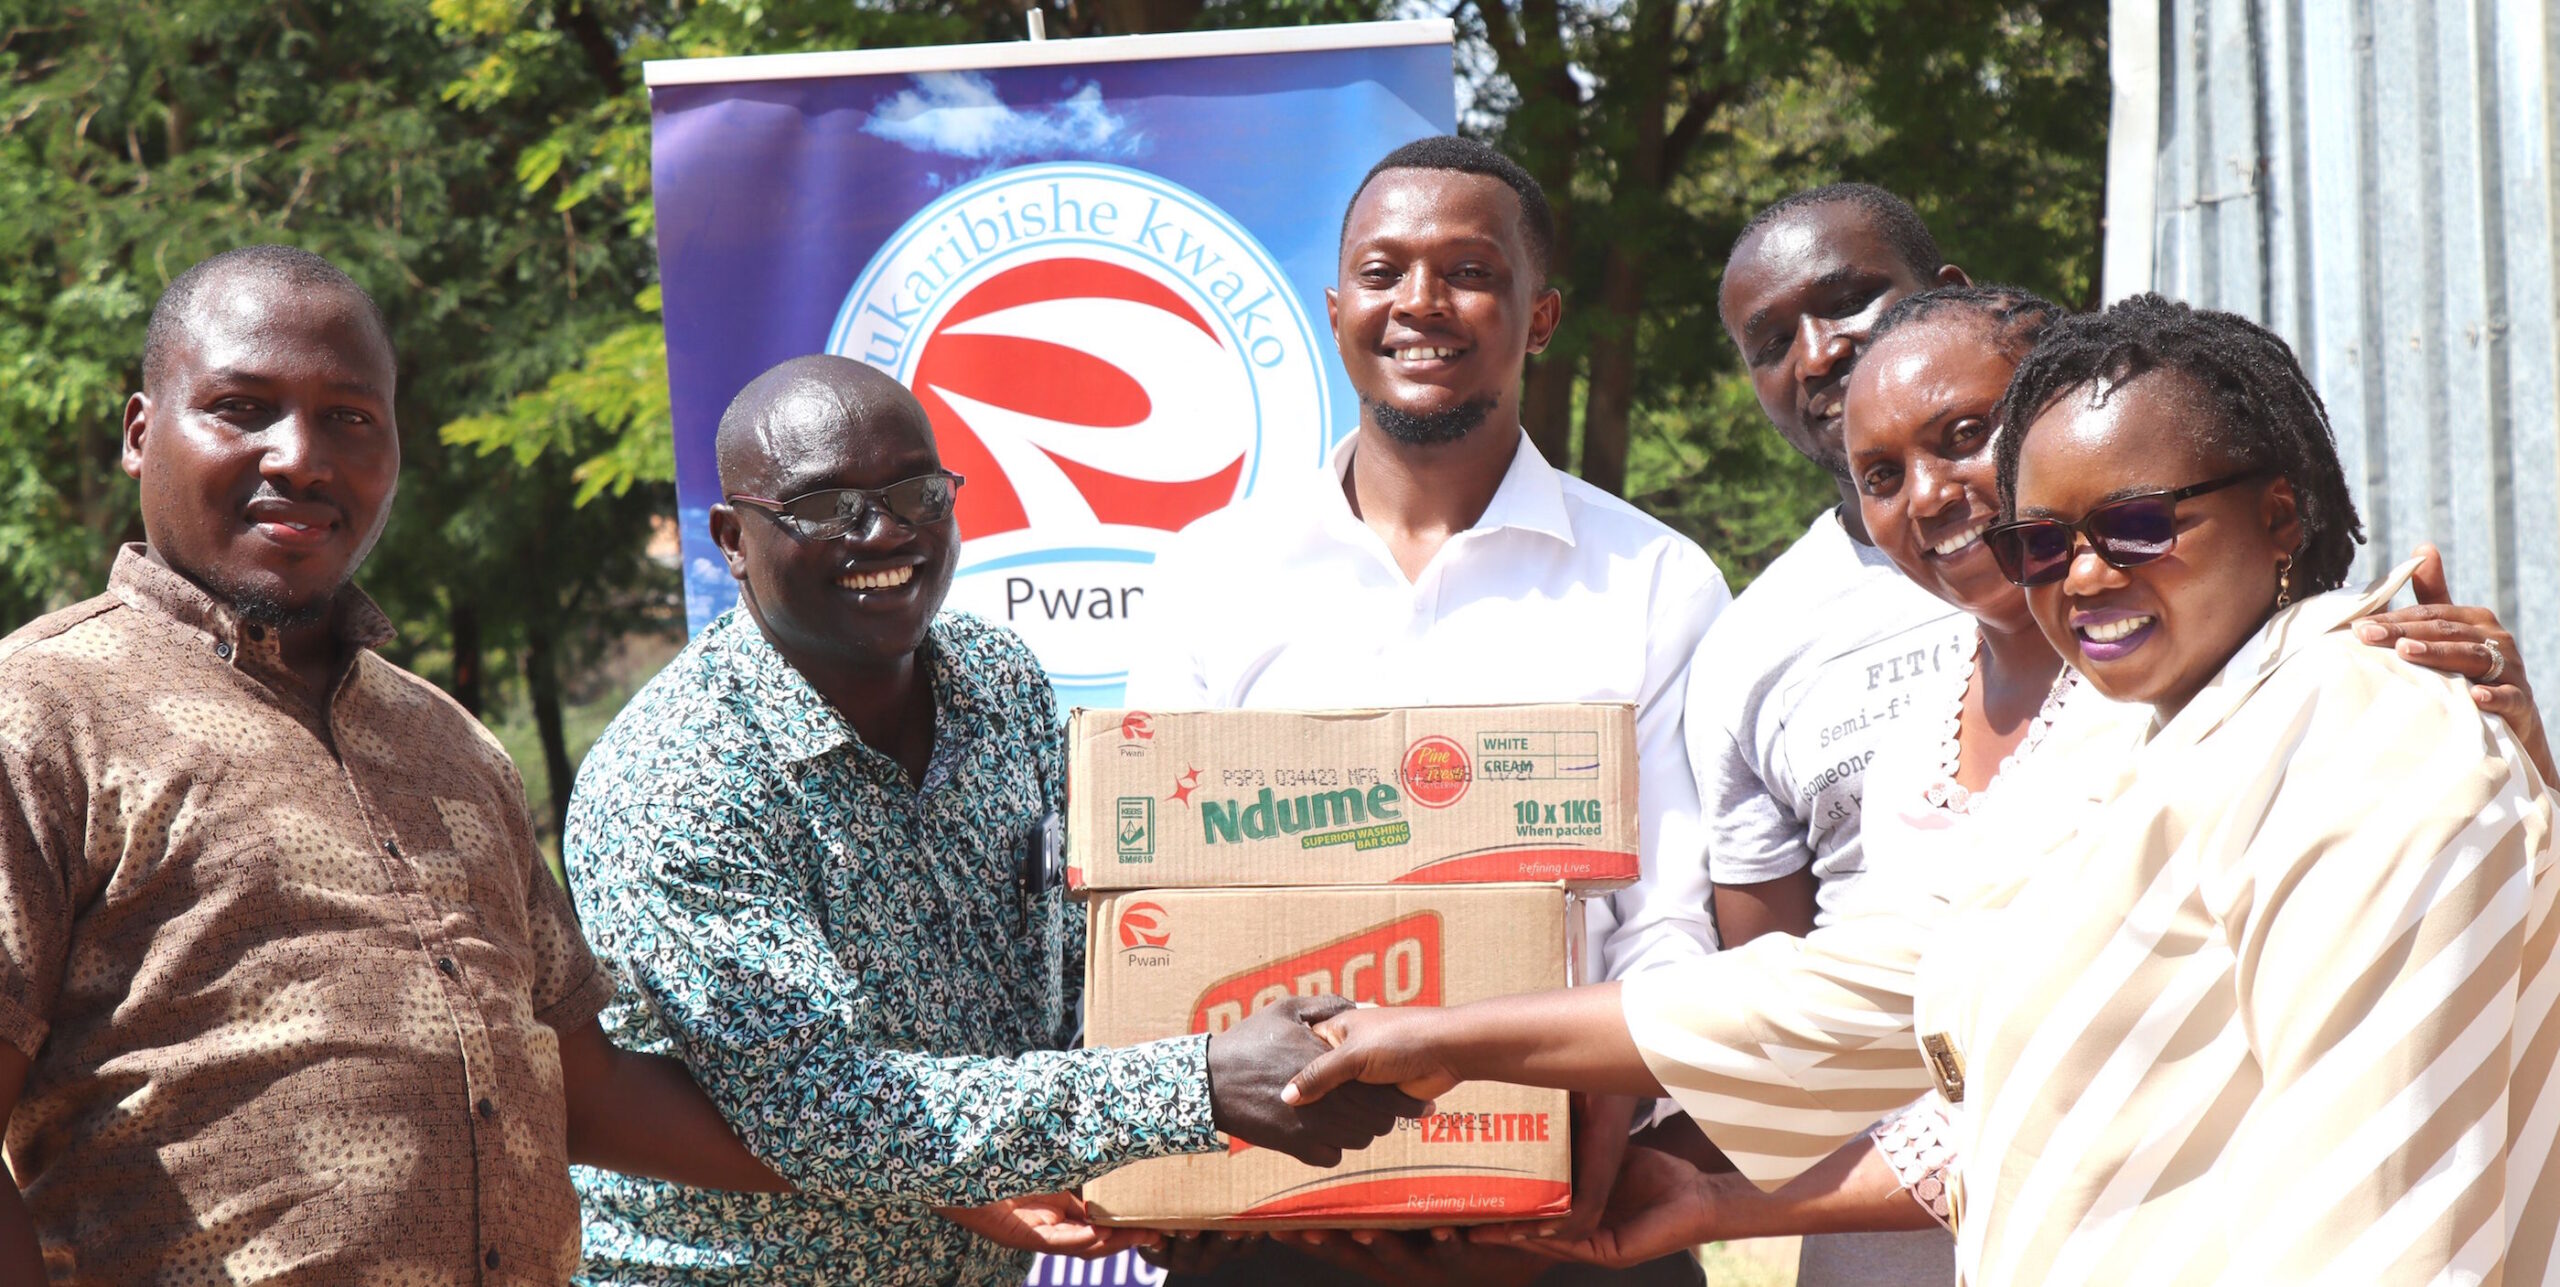 Pwani Oil’s Central Team Lead, Susan Njeru Mungai (Far Right), hands over a donation of cooking oil and personal care items, including boxes of bar soap, to Isiolo North constituency representatives. The donation aims to assist at least 1,000 families affected by recent floods.